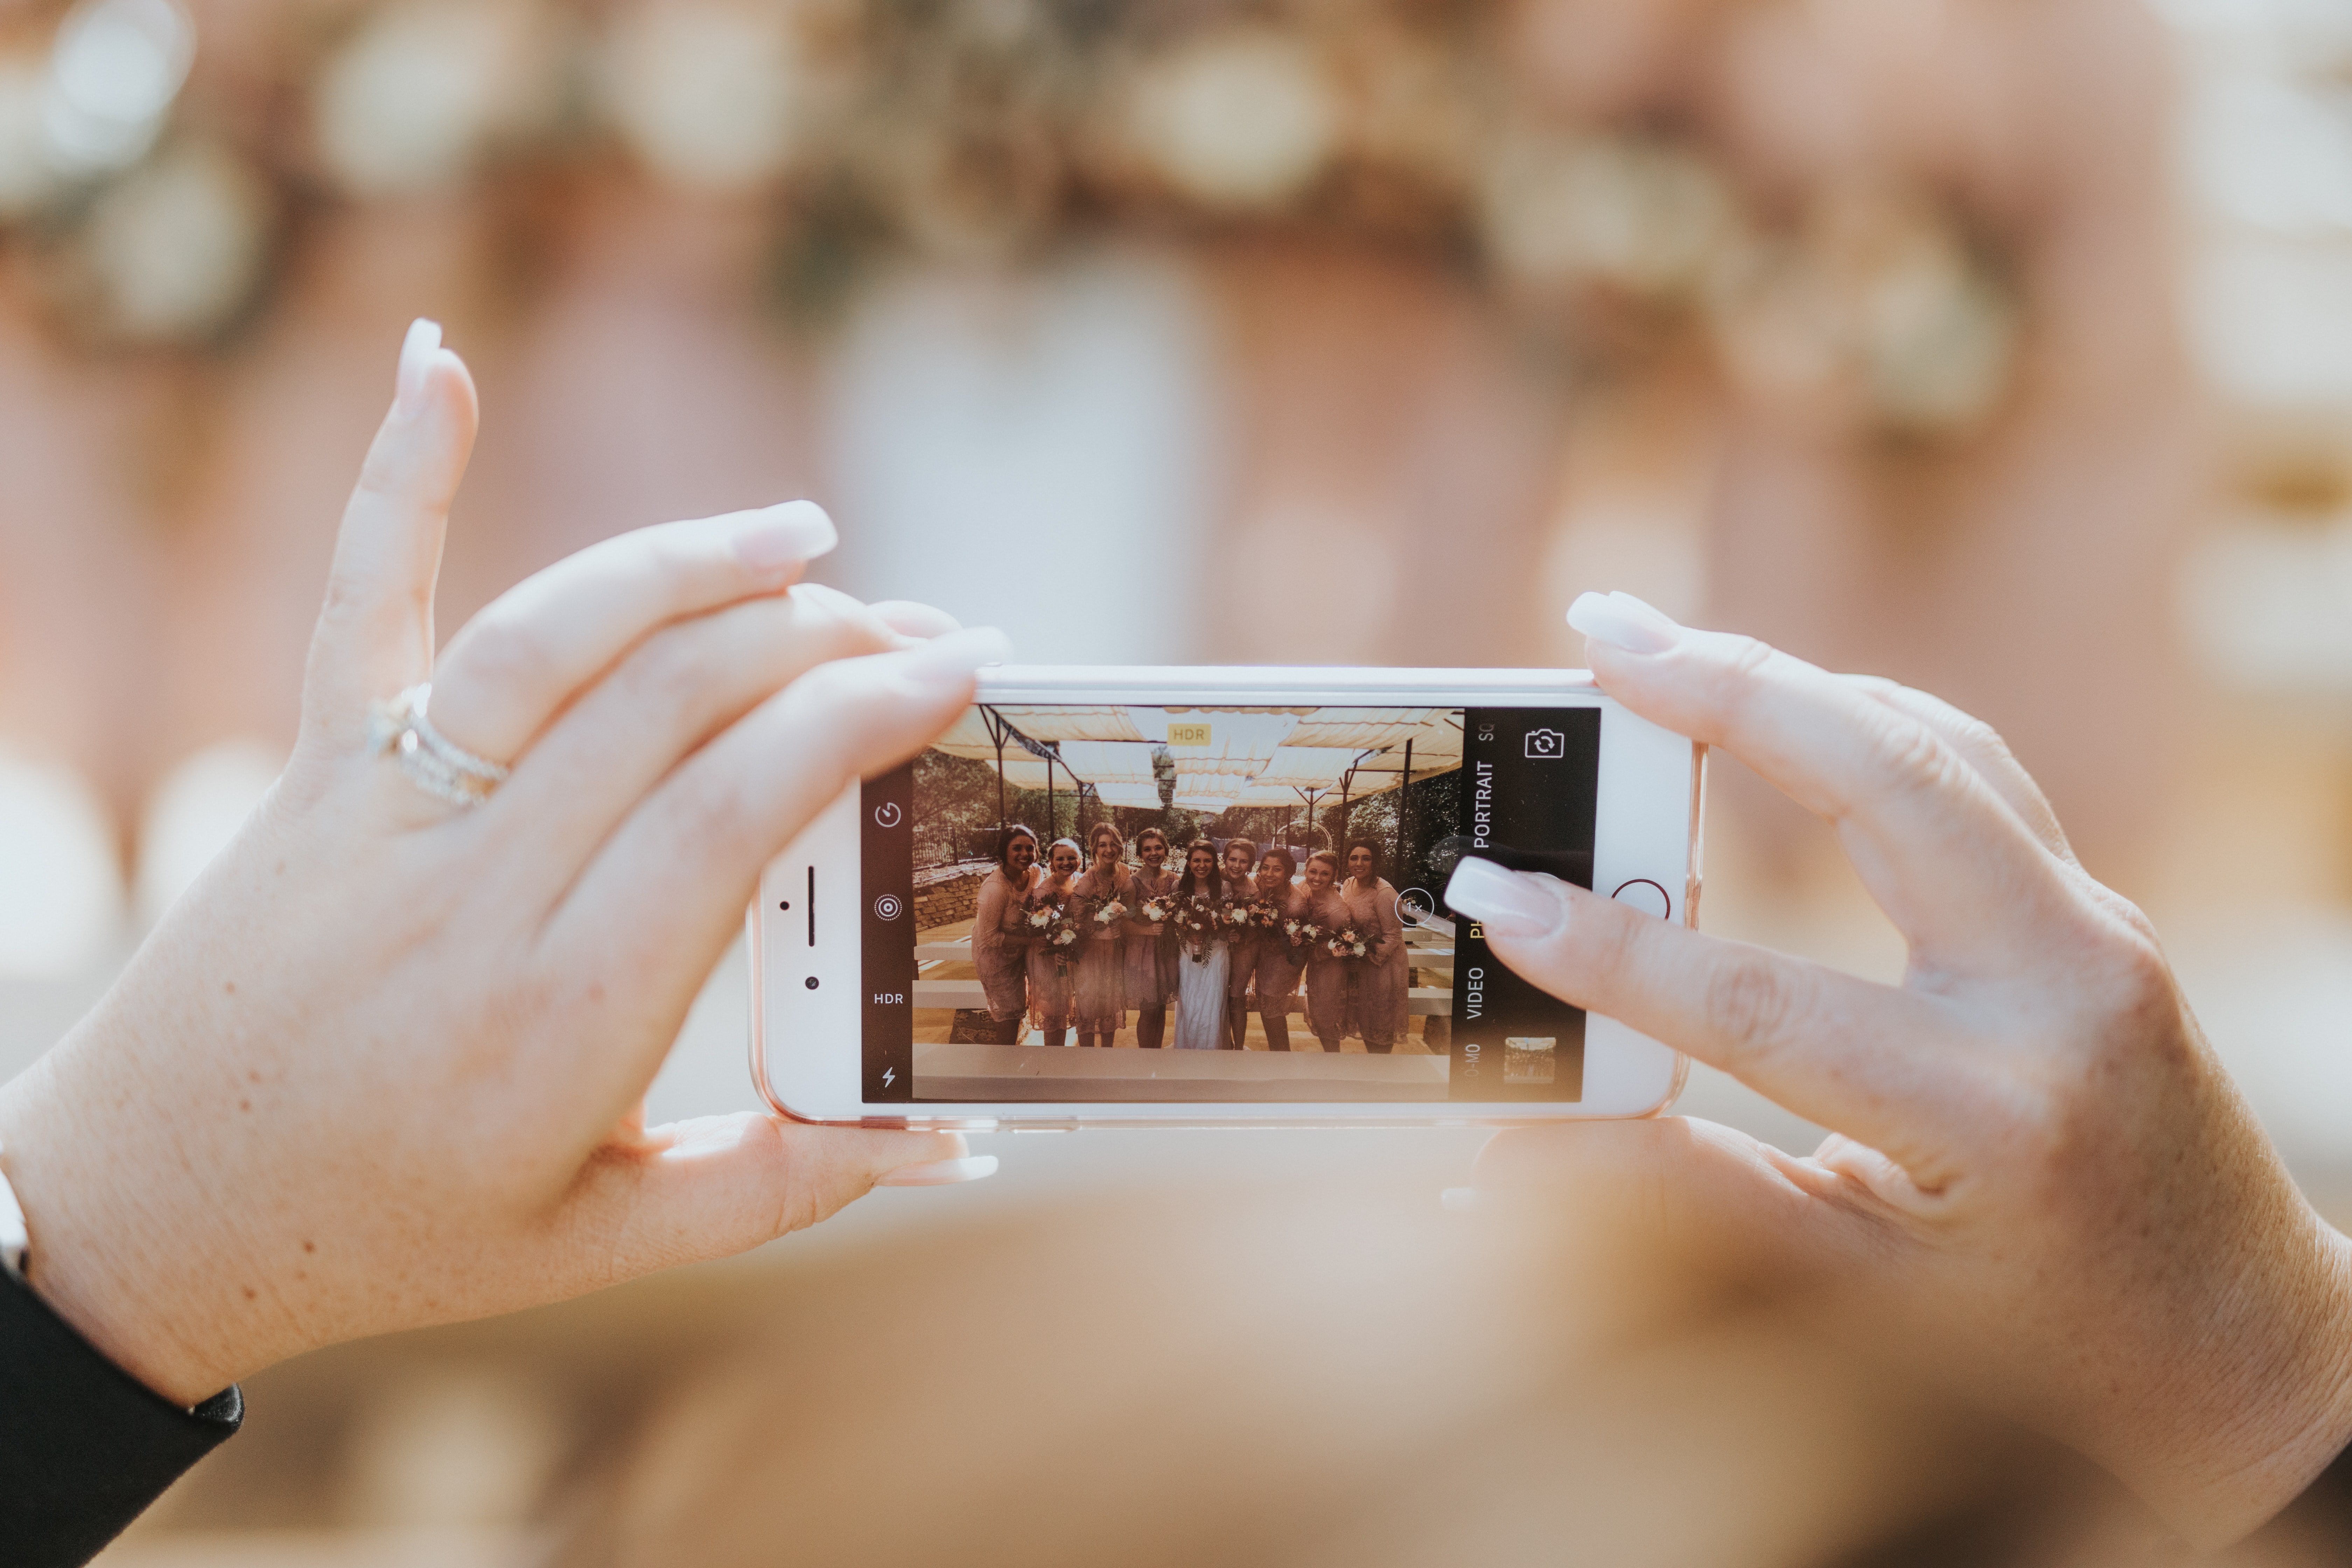 The bride-to-be didn't want OP's husband to be in any of her wedding photos. | Source: Unsplash